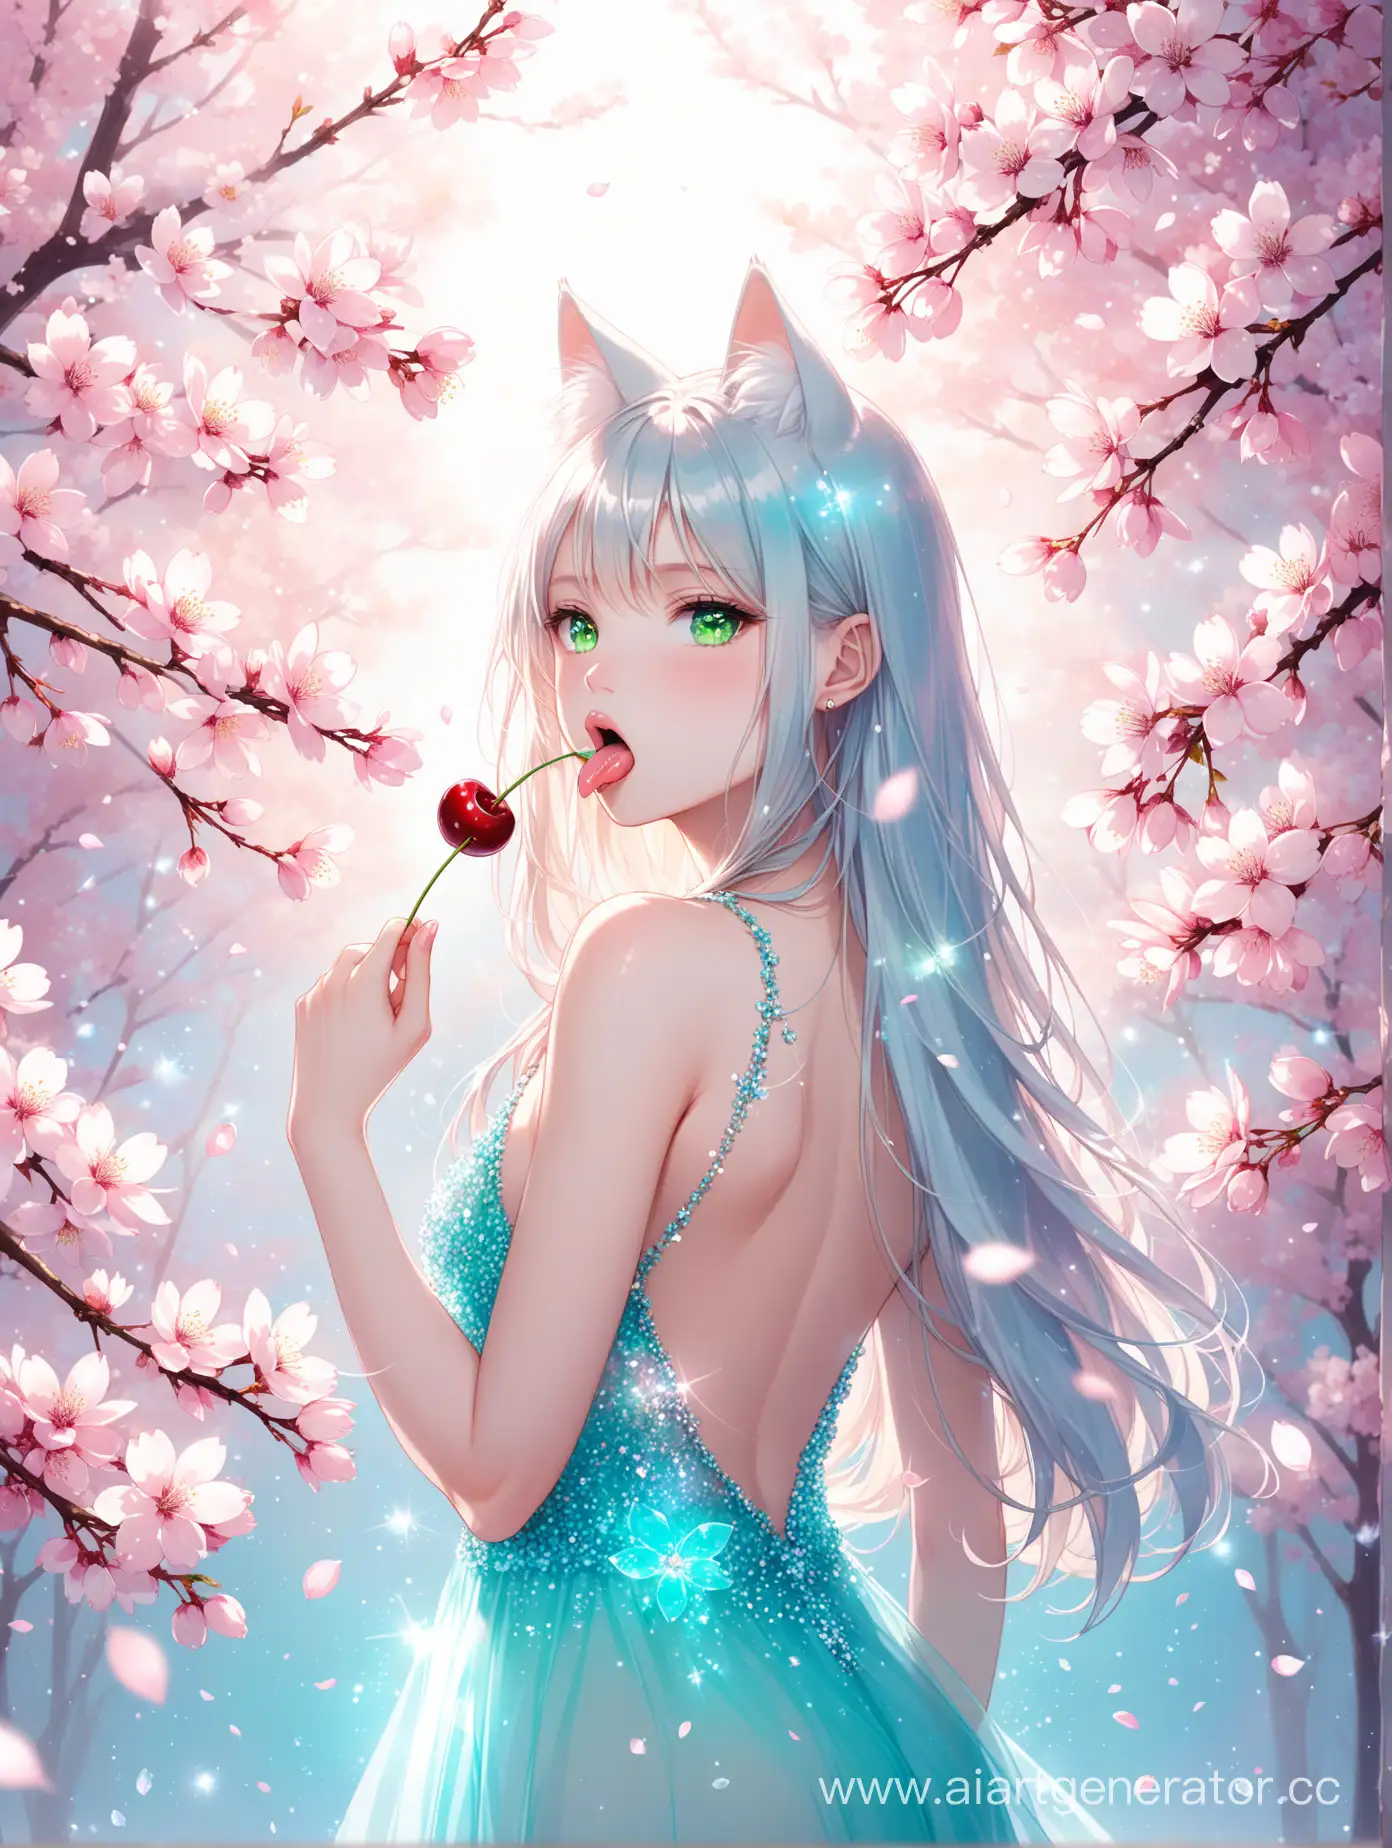 Playful-CatEared-Girl-with-Cherry-Blossom-Tongue-Art